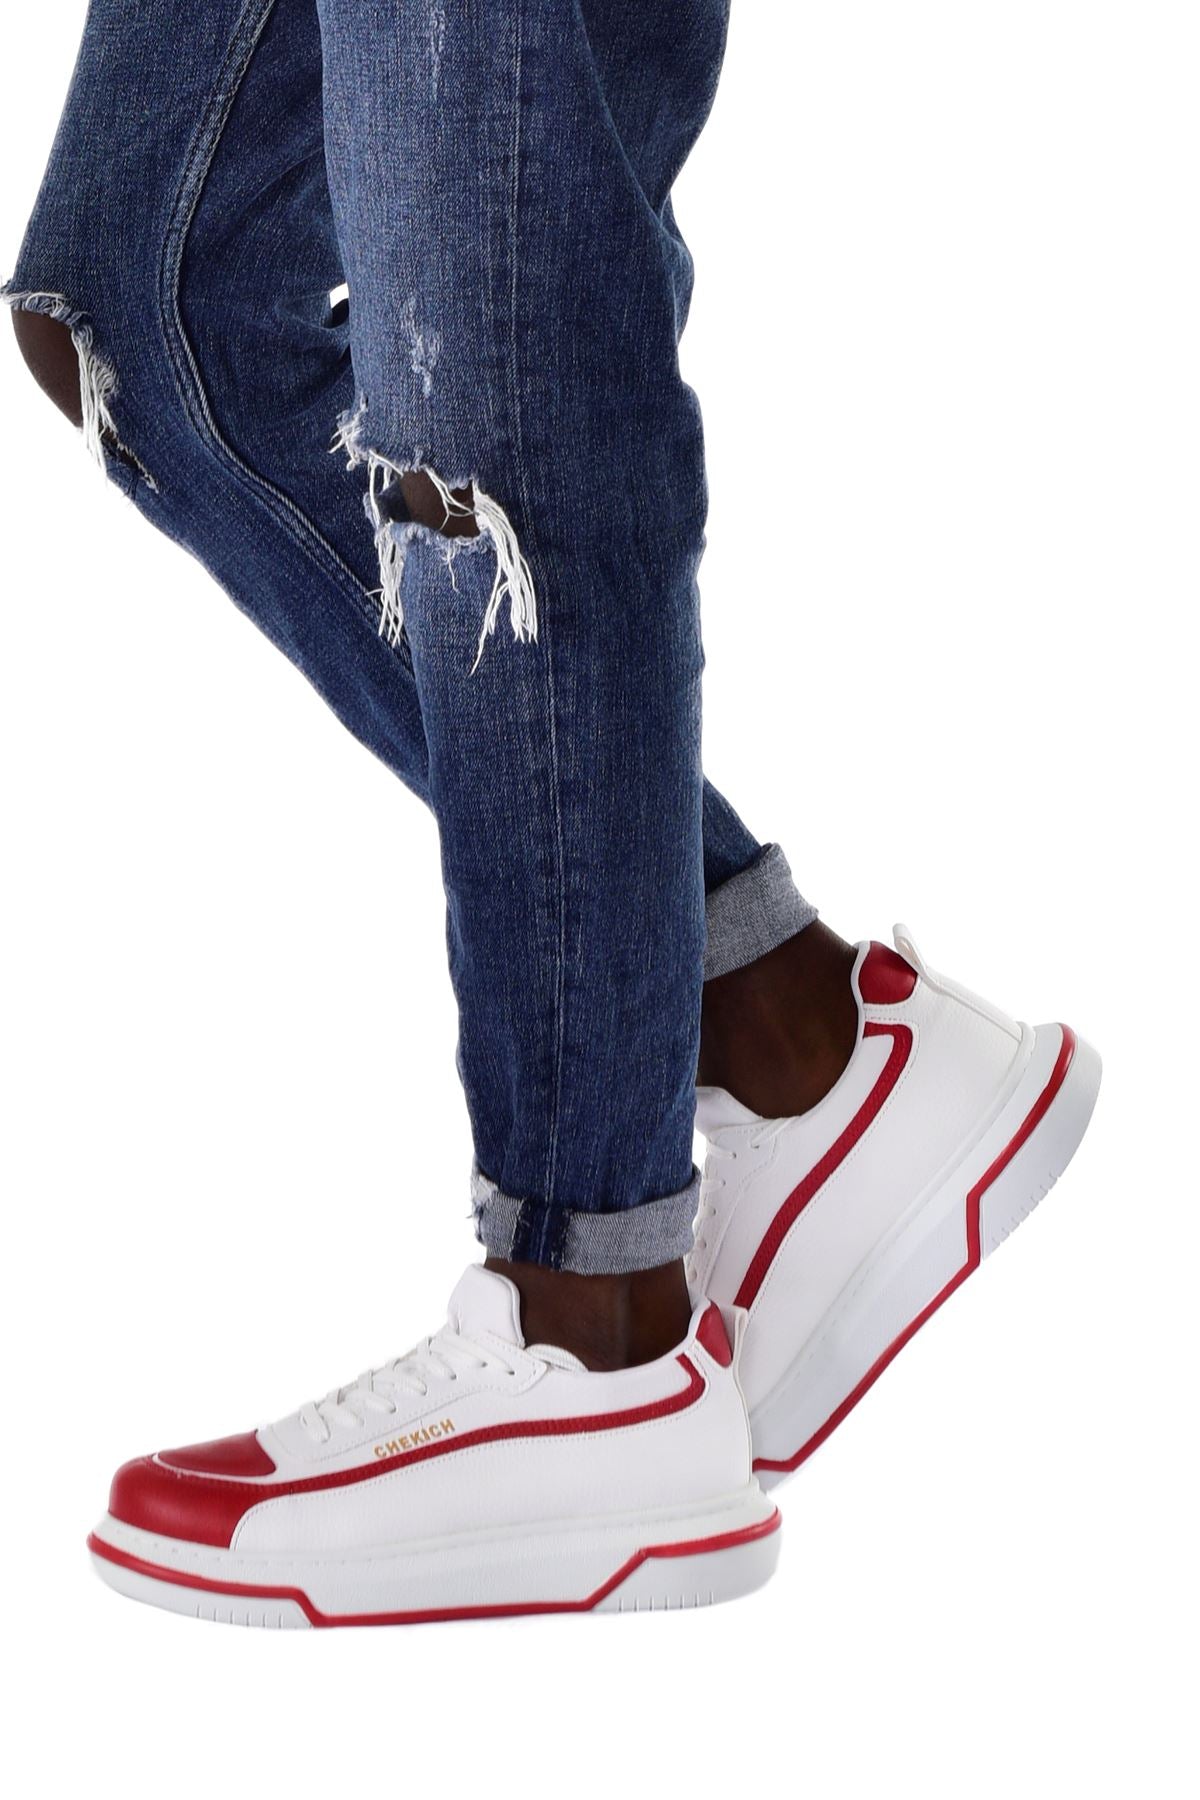 CH241 CBT Signature Line Up Men Sneaker Red / White